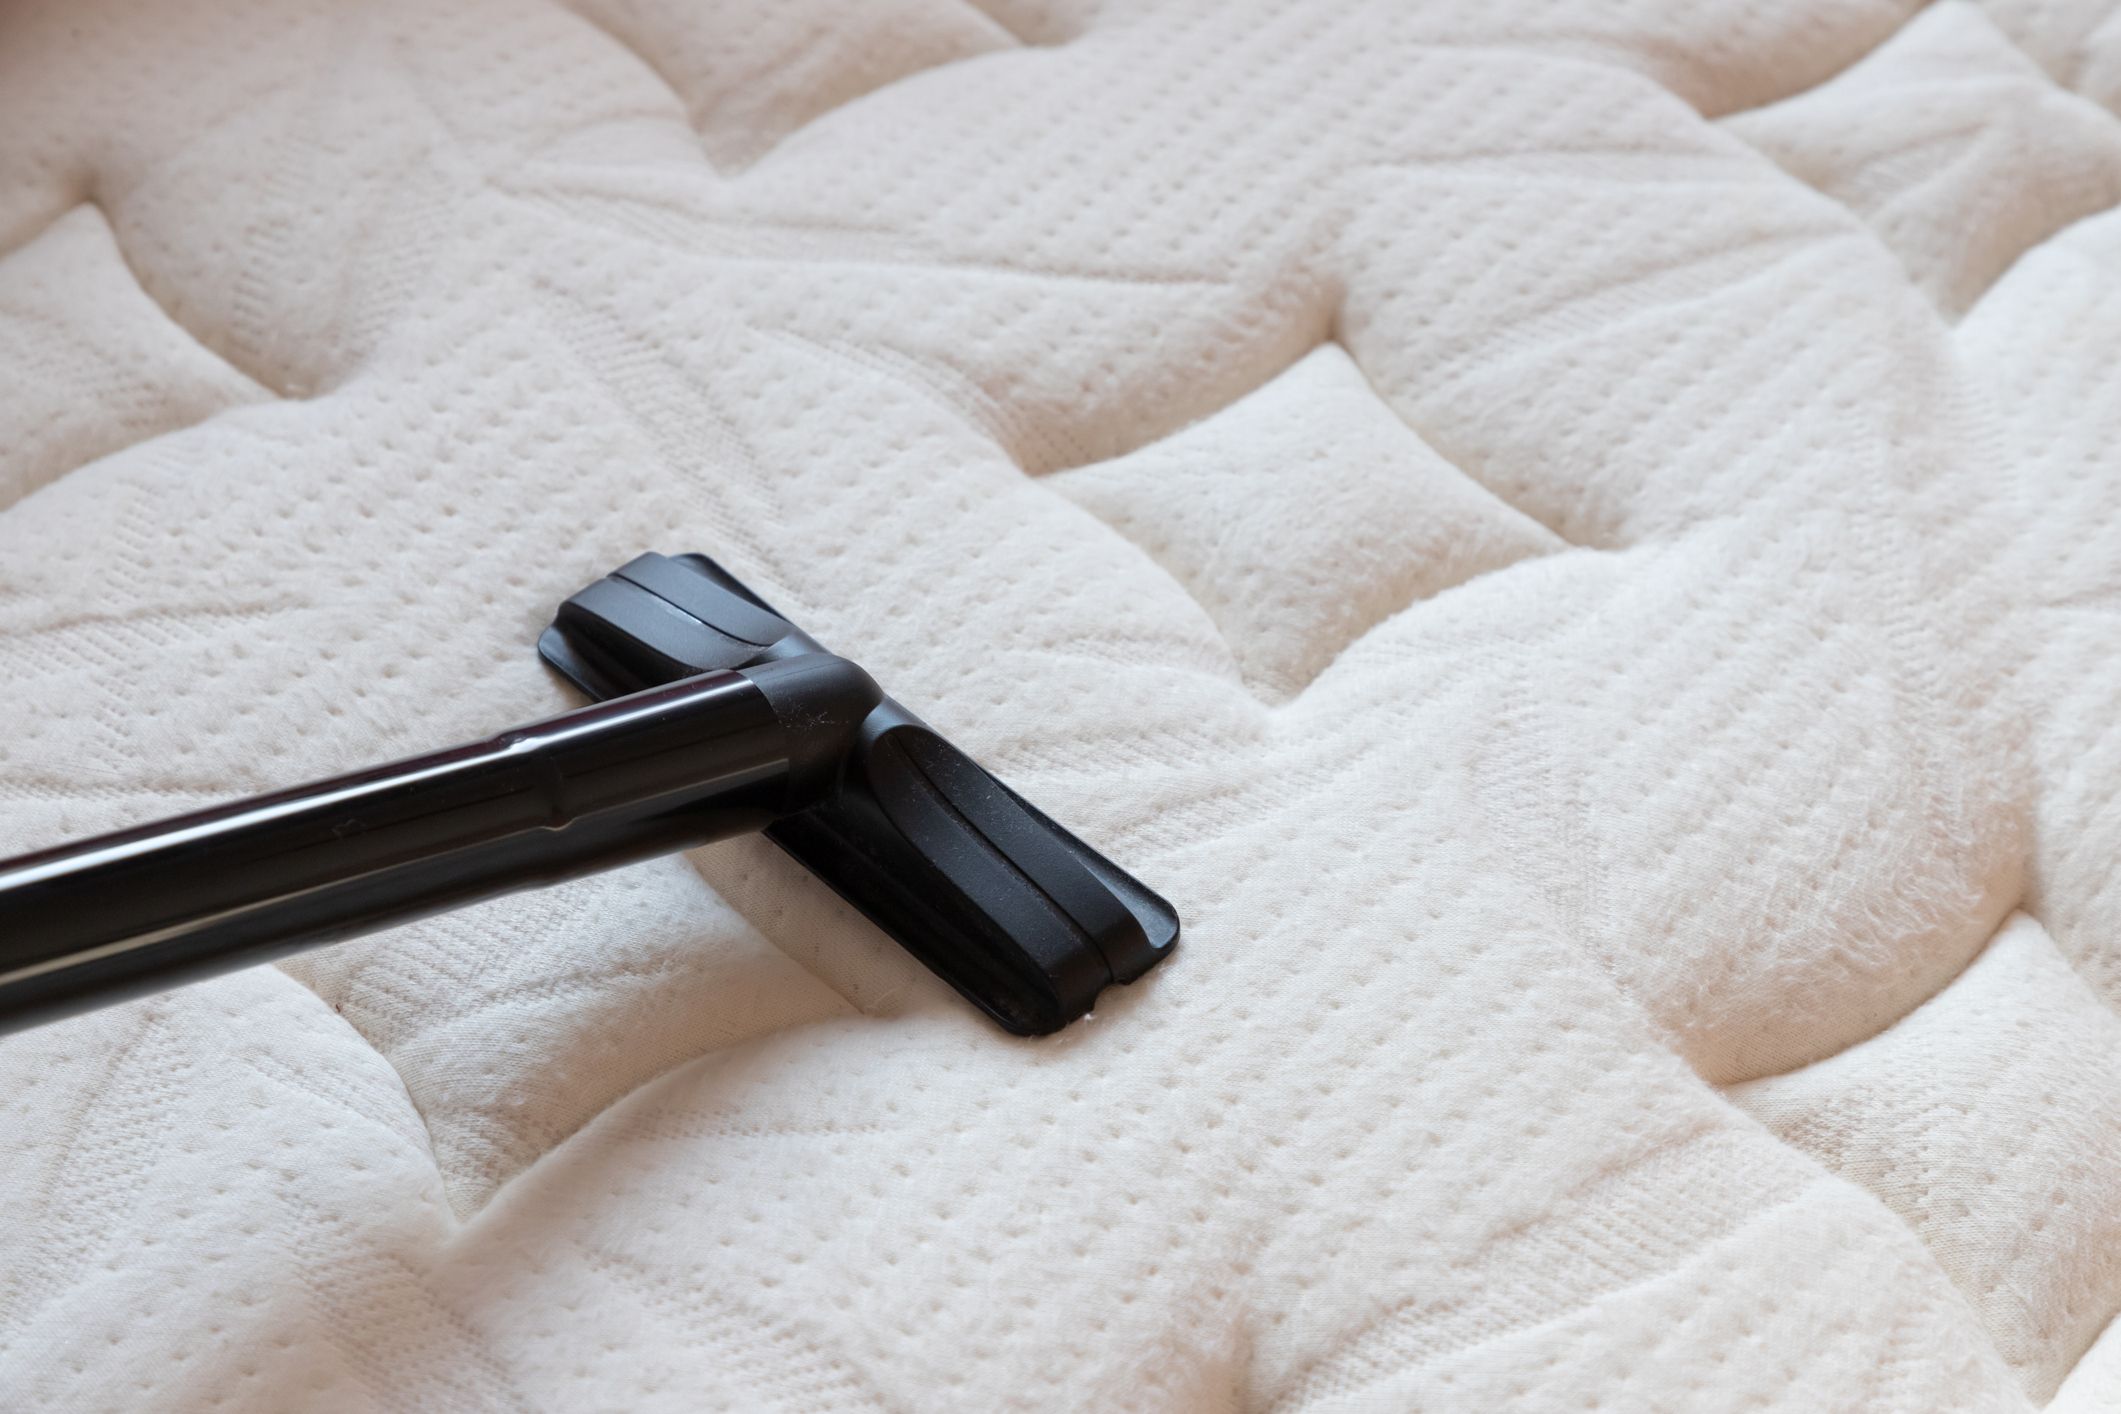 How to Clean a Mattress - Step by Step Guide to Cleaning a Mattress